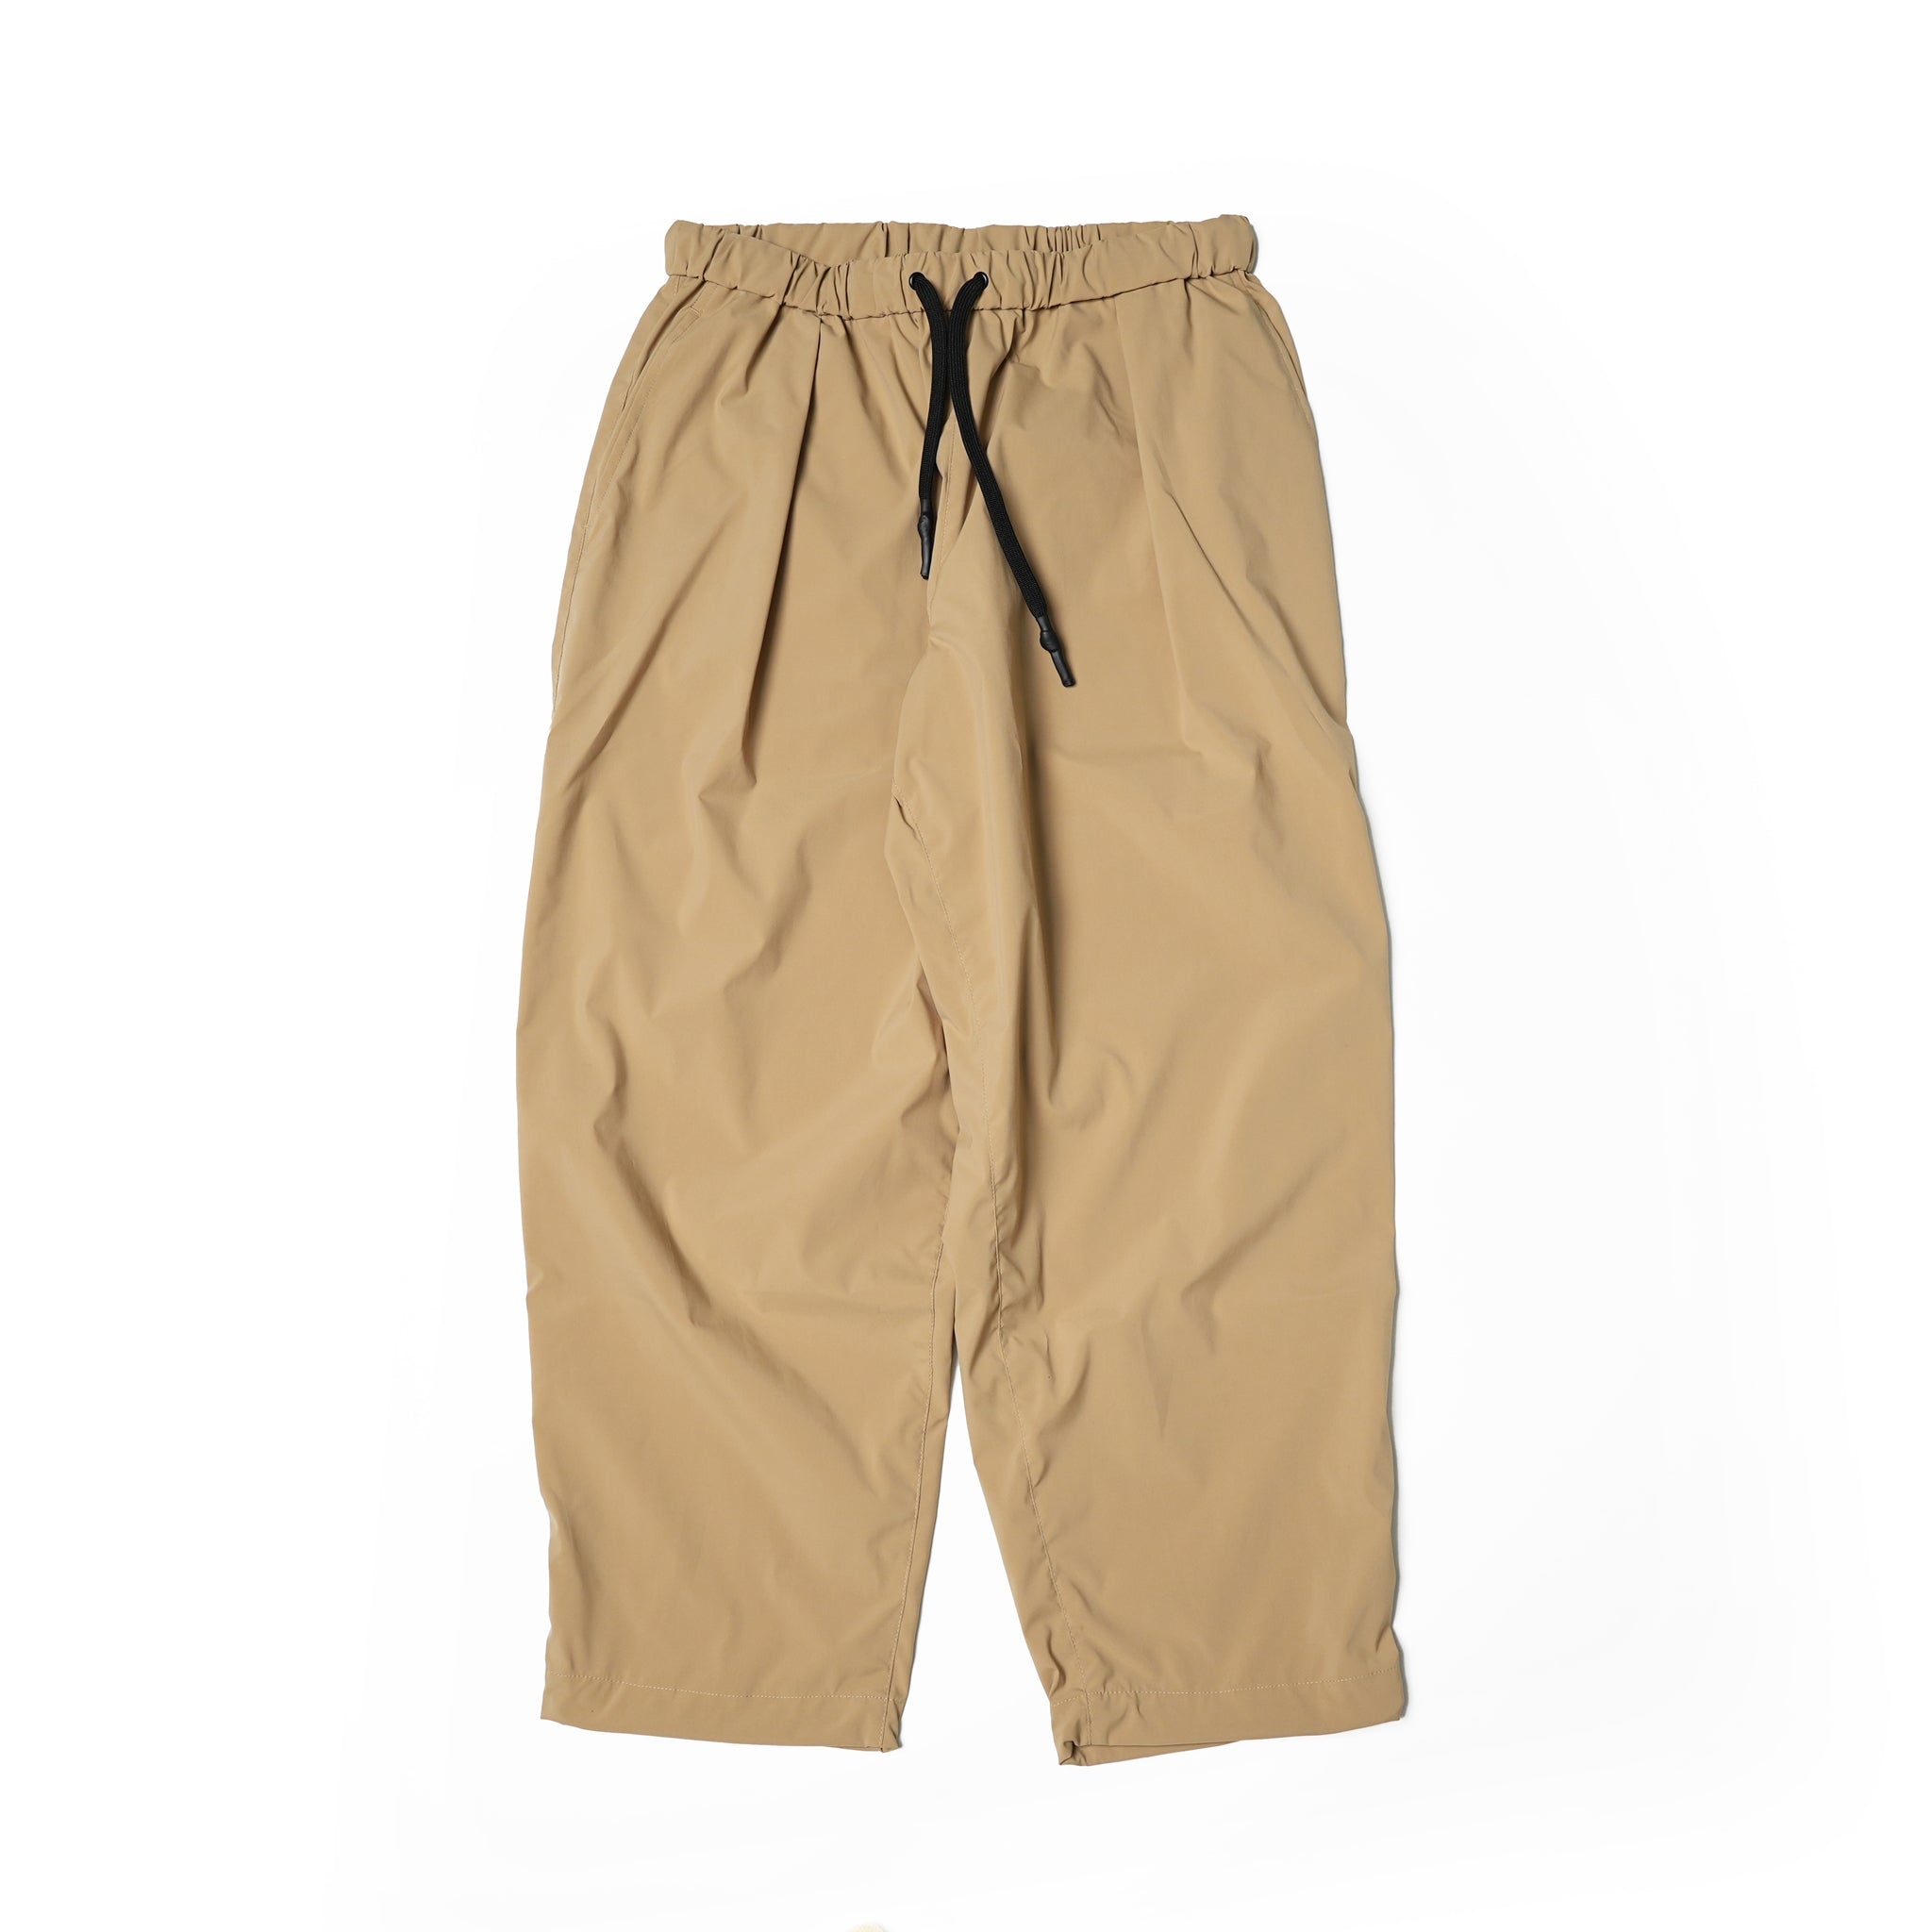 No:UN-014_AW23 | Name:WATER REPELLENT TAPERED STRETCH TRACK PANTS | Color:Beige【UNTRACE_アントレース】